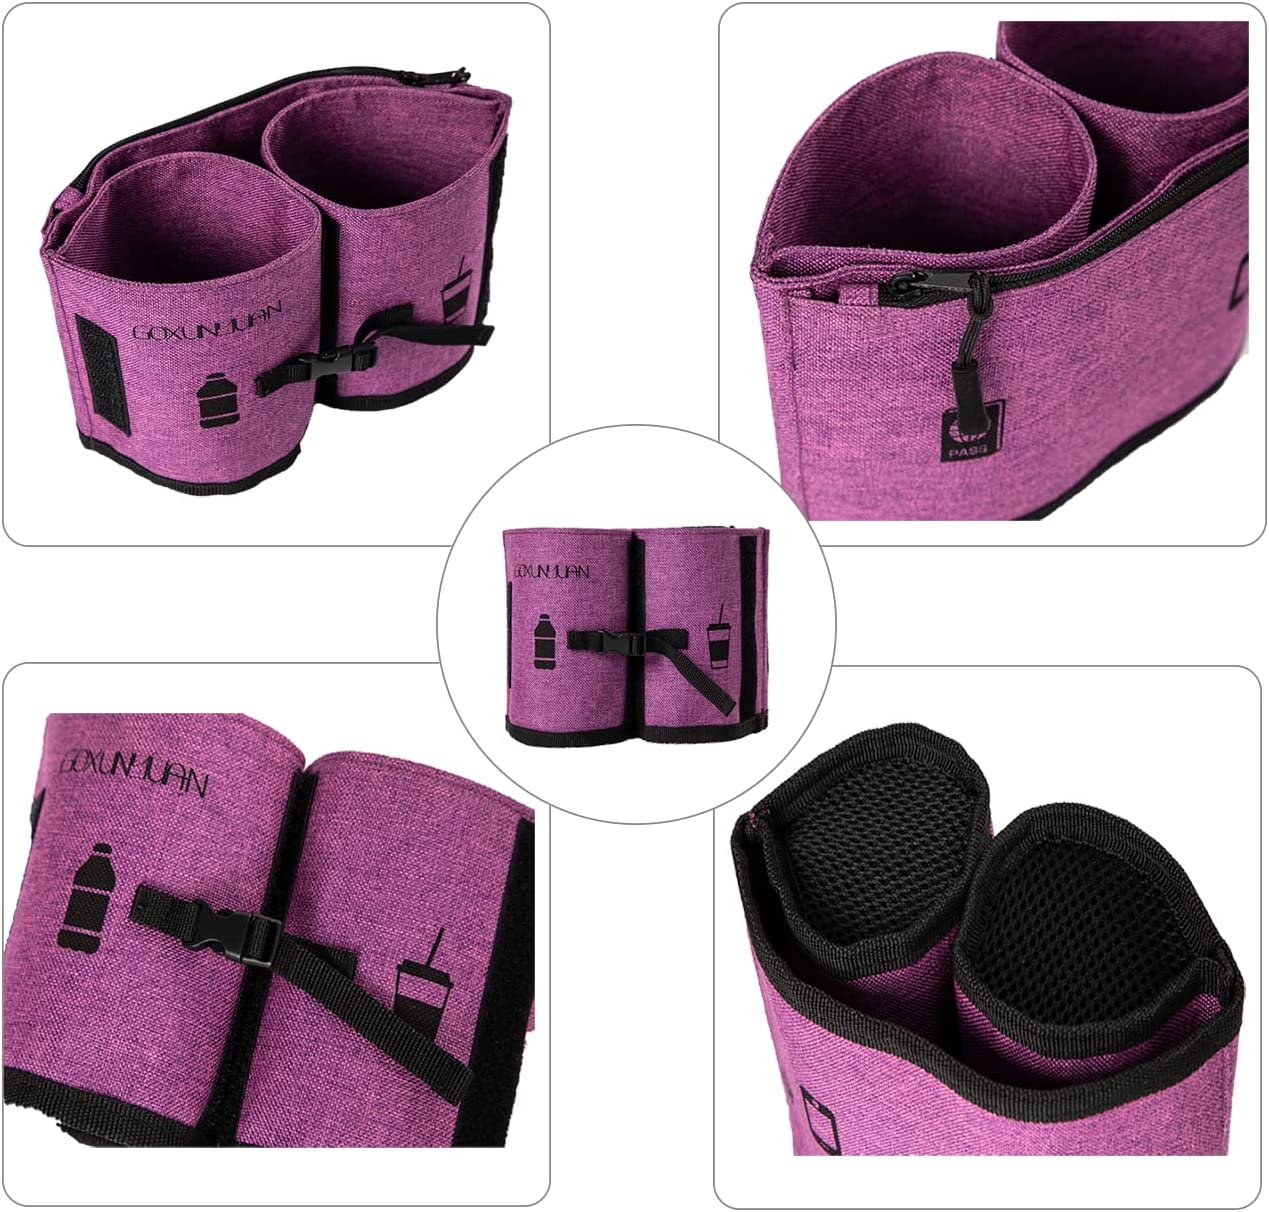 Luggage Travel Cup Holder Drink Caddy Bag Hold Two Coffee Mugs Fits Roll on All Suitcase Handles Portable Universal Traveler Accessory for Men Women Purple